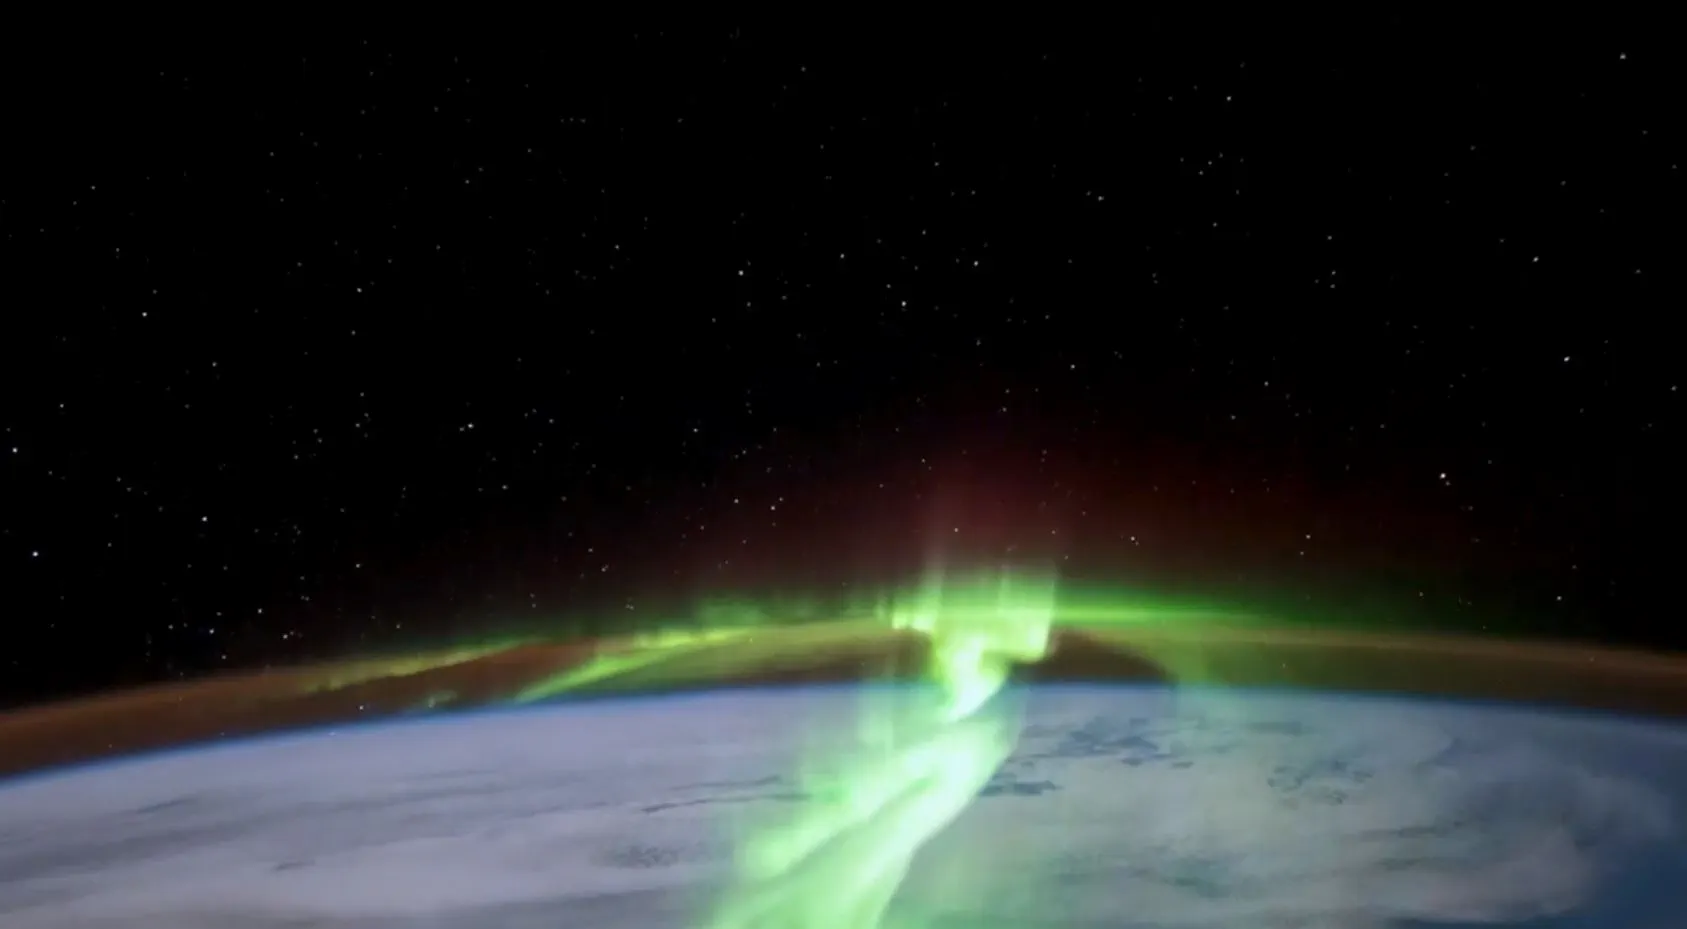 A view of Planet Earth from the International Space Station, showcasing the Aurora Borealis